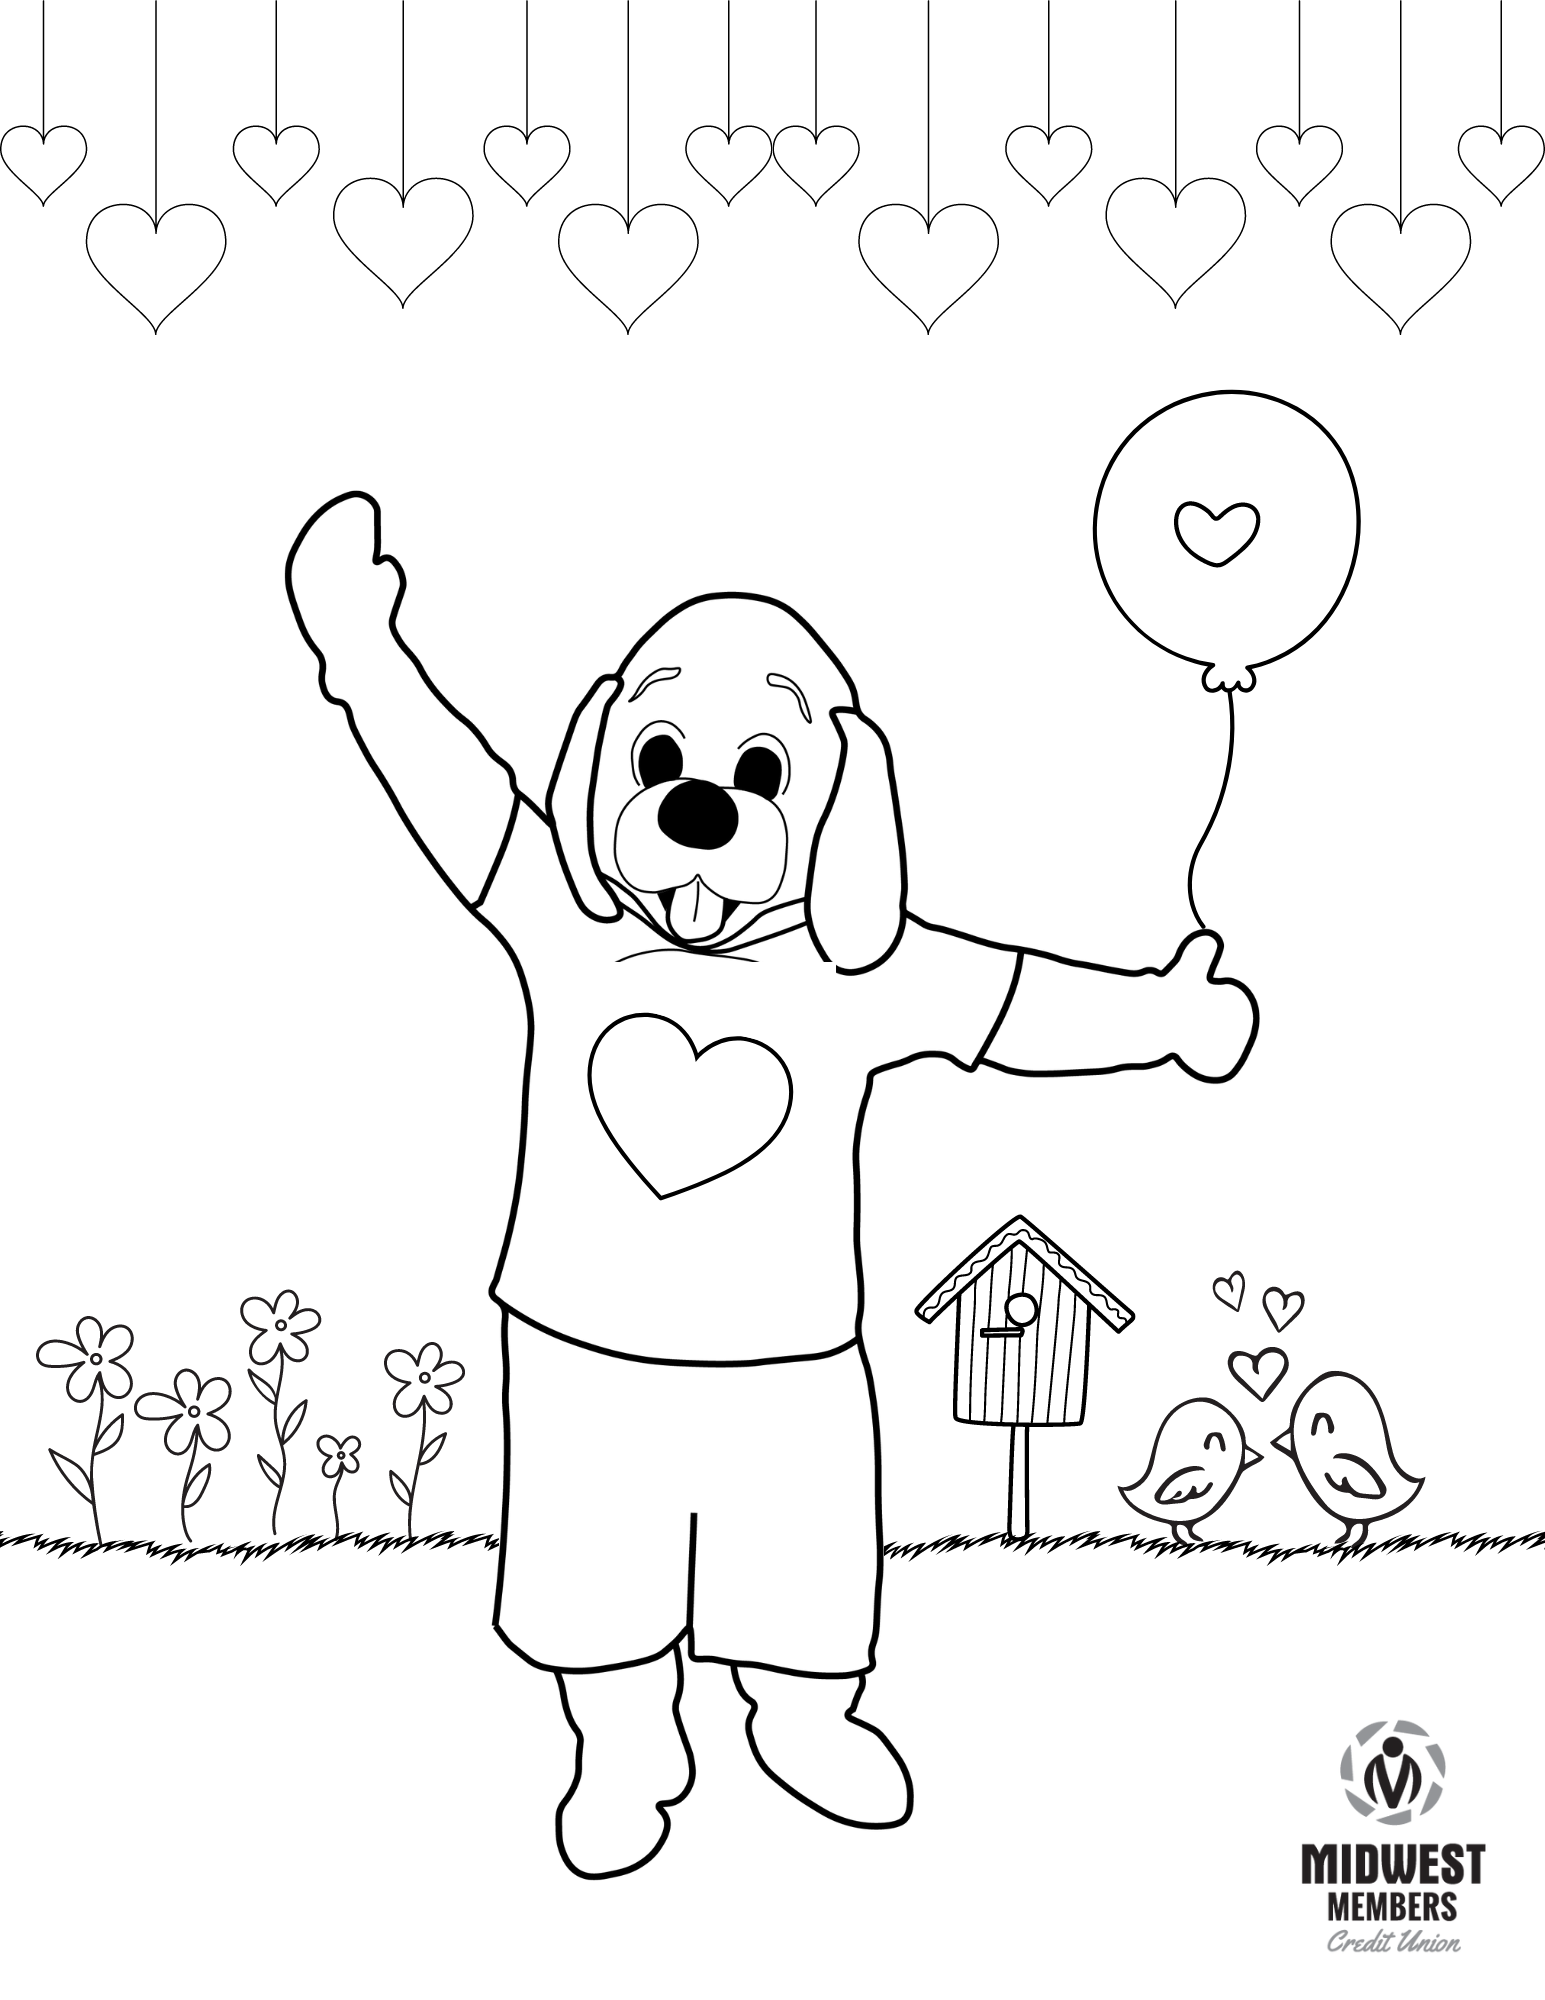 Money Dog Valentine Coloring Page